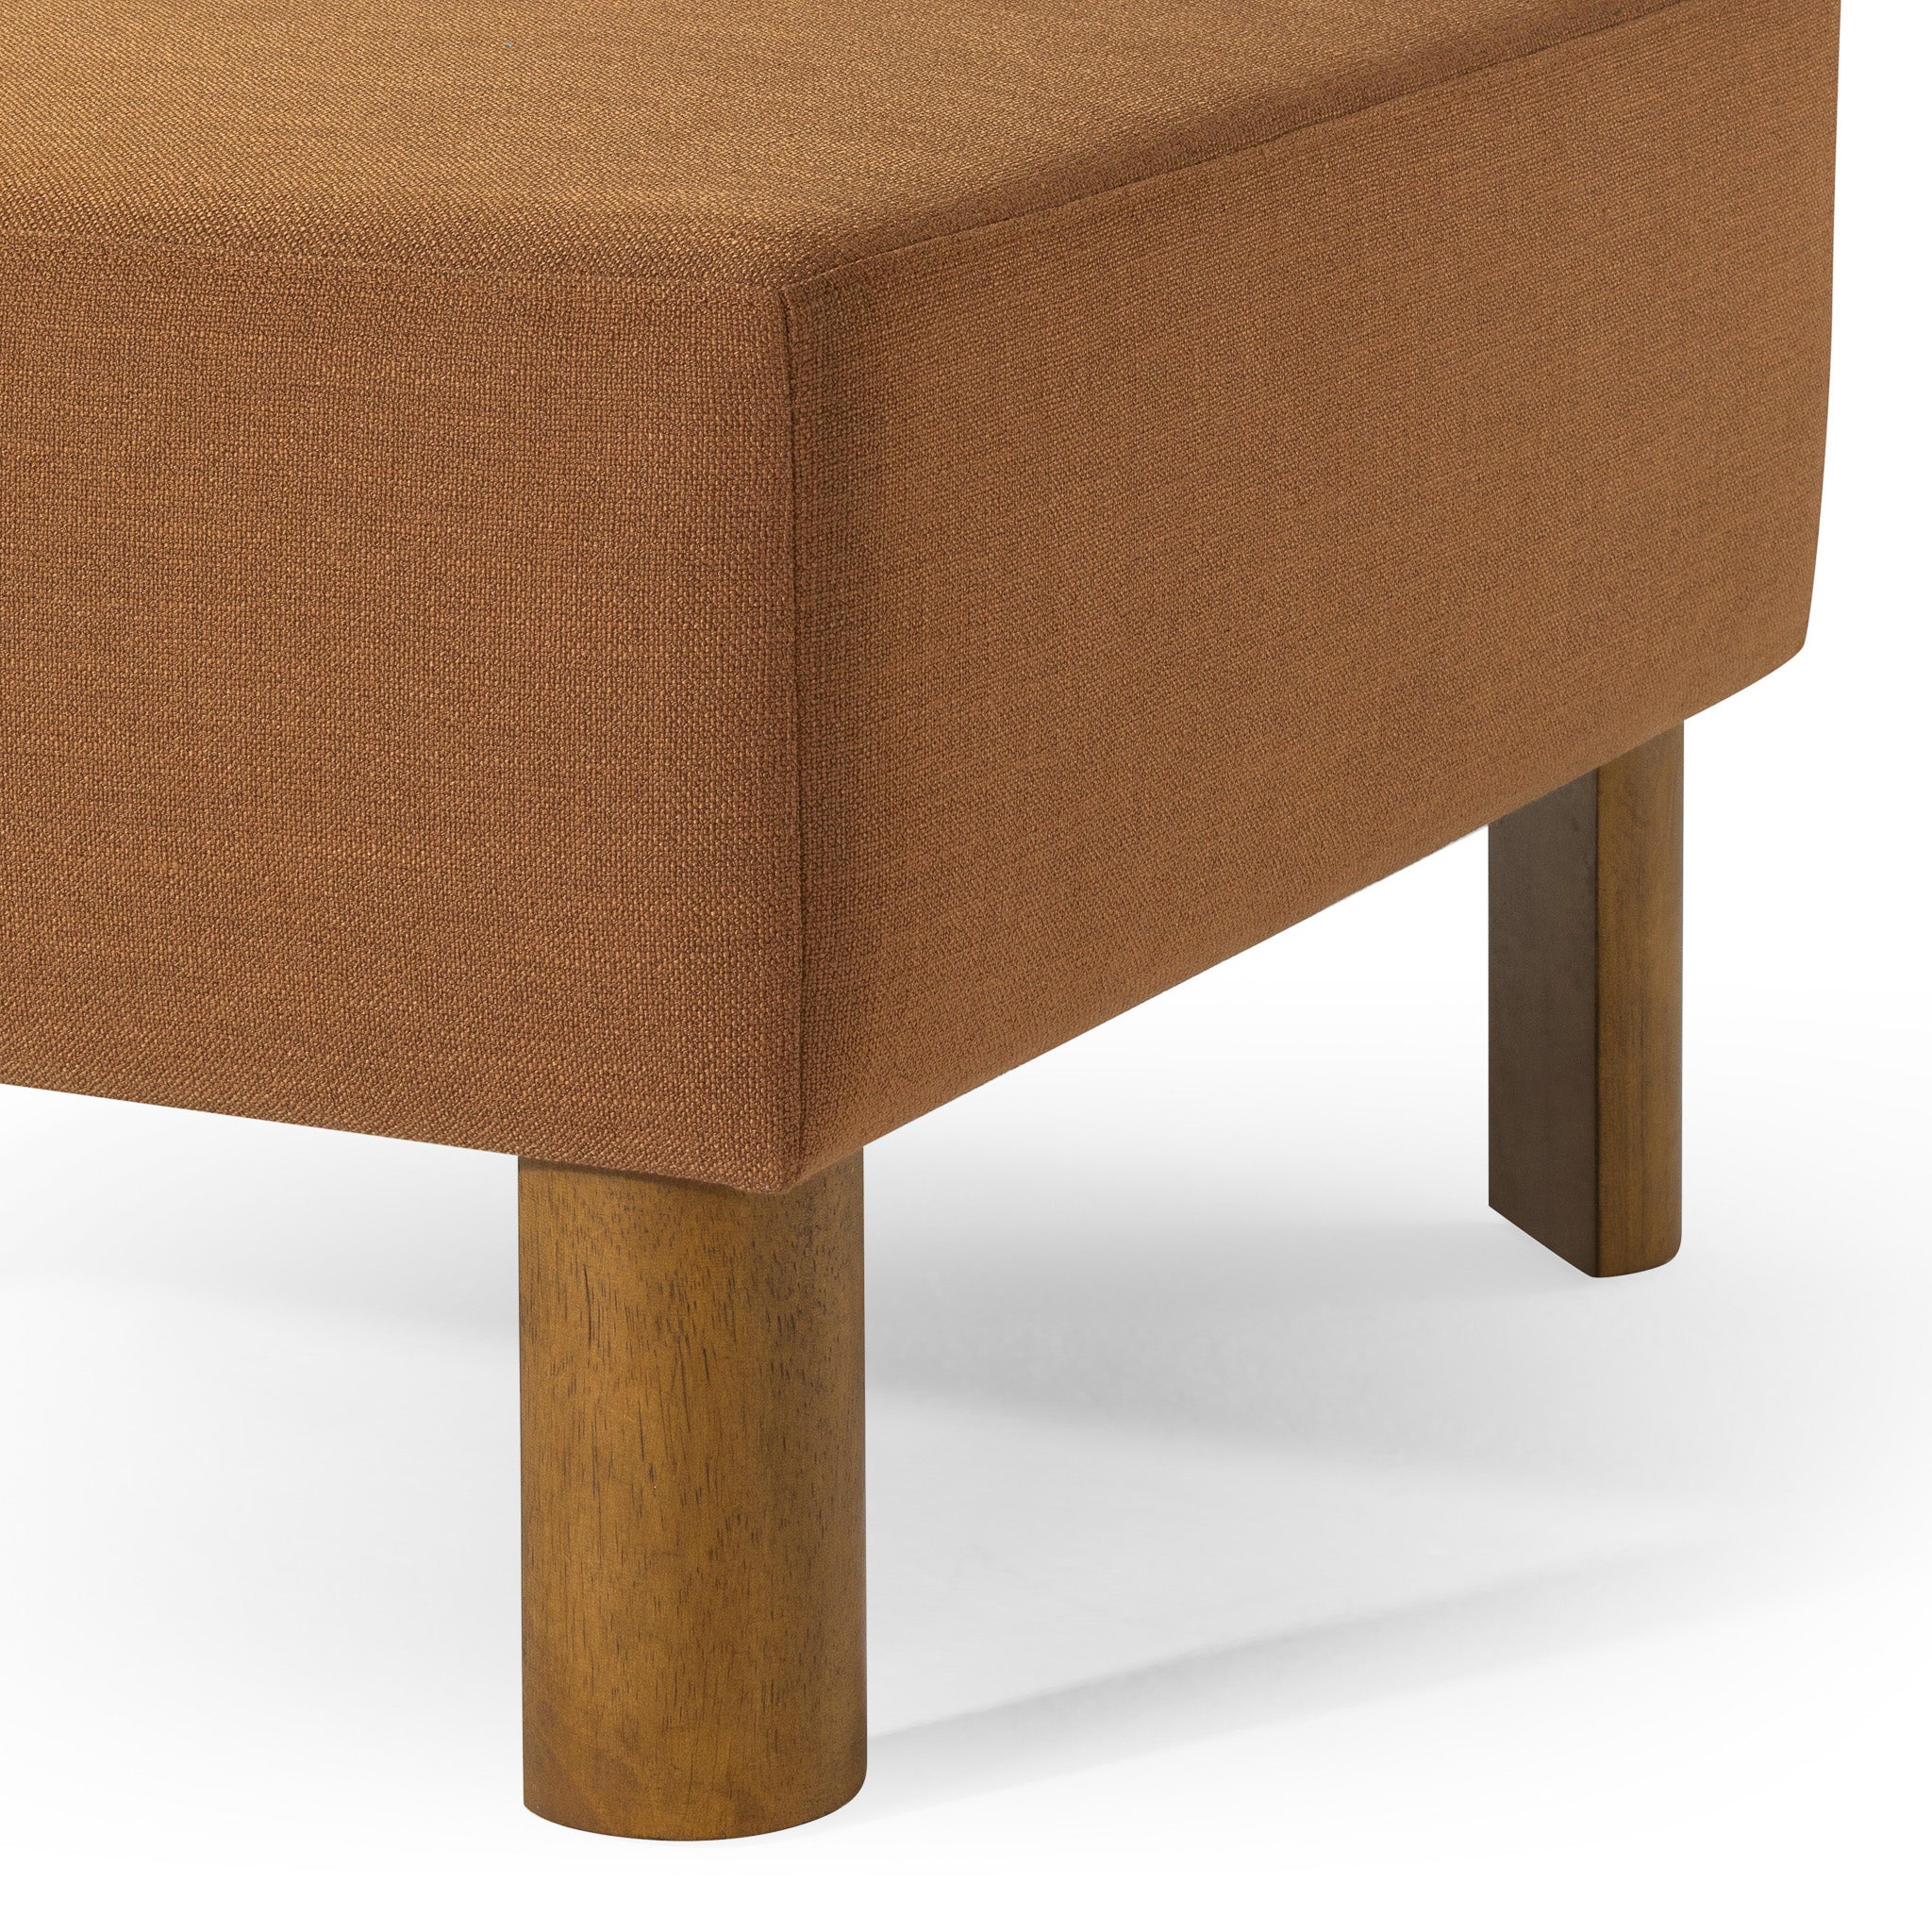 Lena Contemporary Upholstered Ottoman with Refined Brown Wood Finish in Ottomans & Benches by Maven Lane